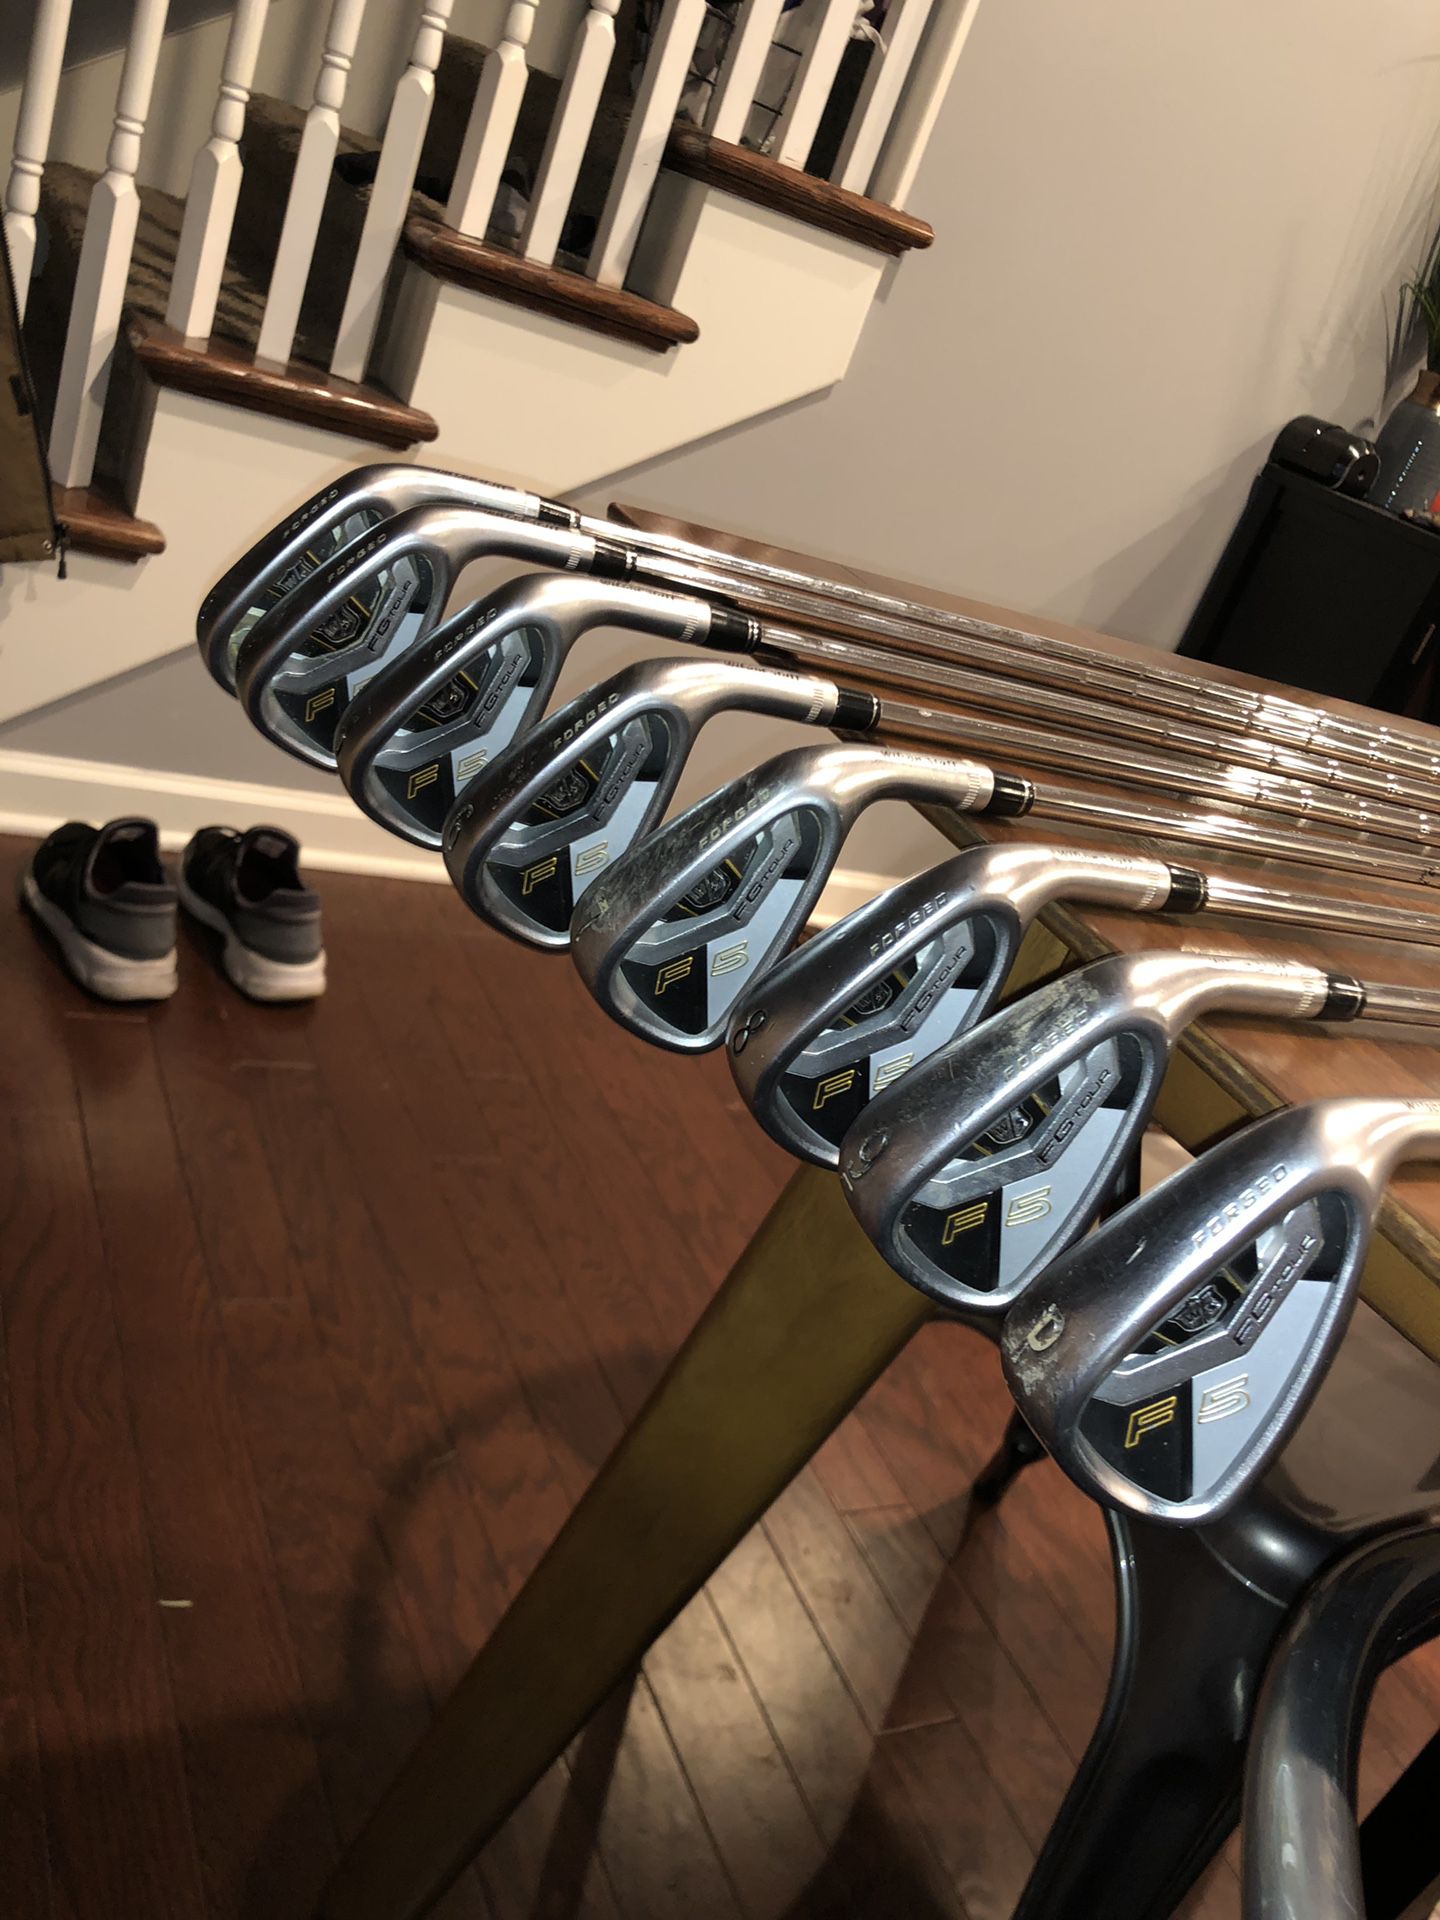 Wilson staff F5 forged irons. 3-GW